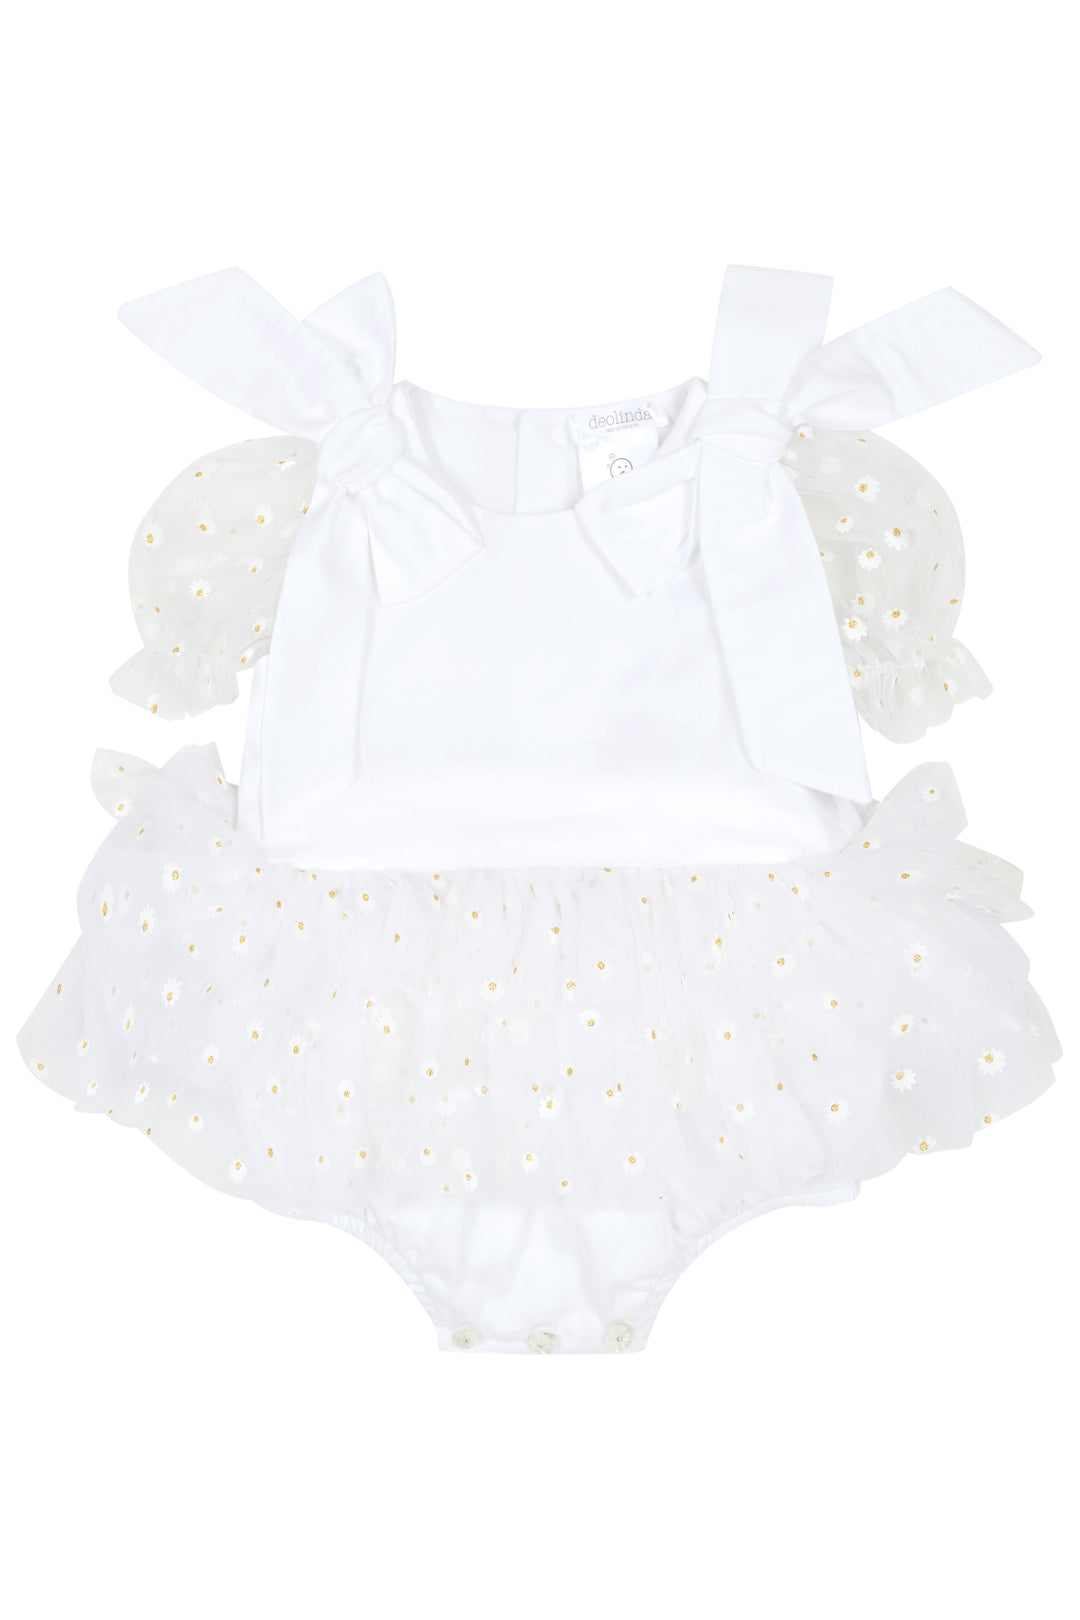 Chic by Deolinda PREORDER "Tallulah" White Tulle Daisy Print Shortie | Millie and John